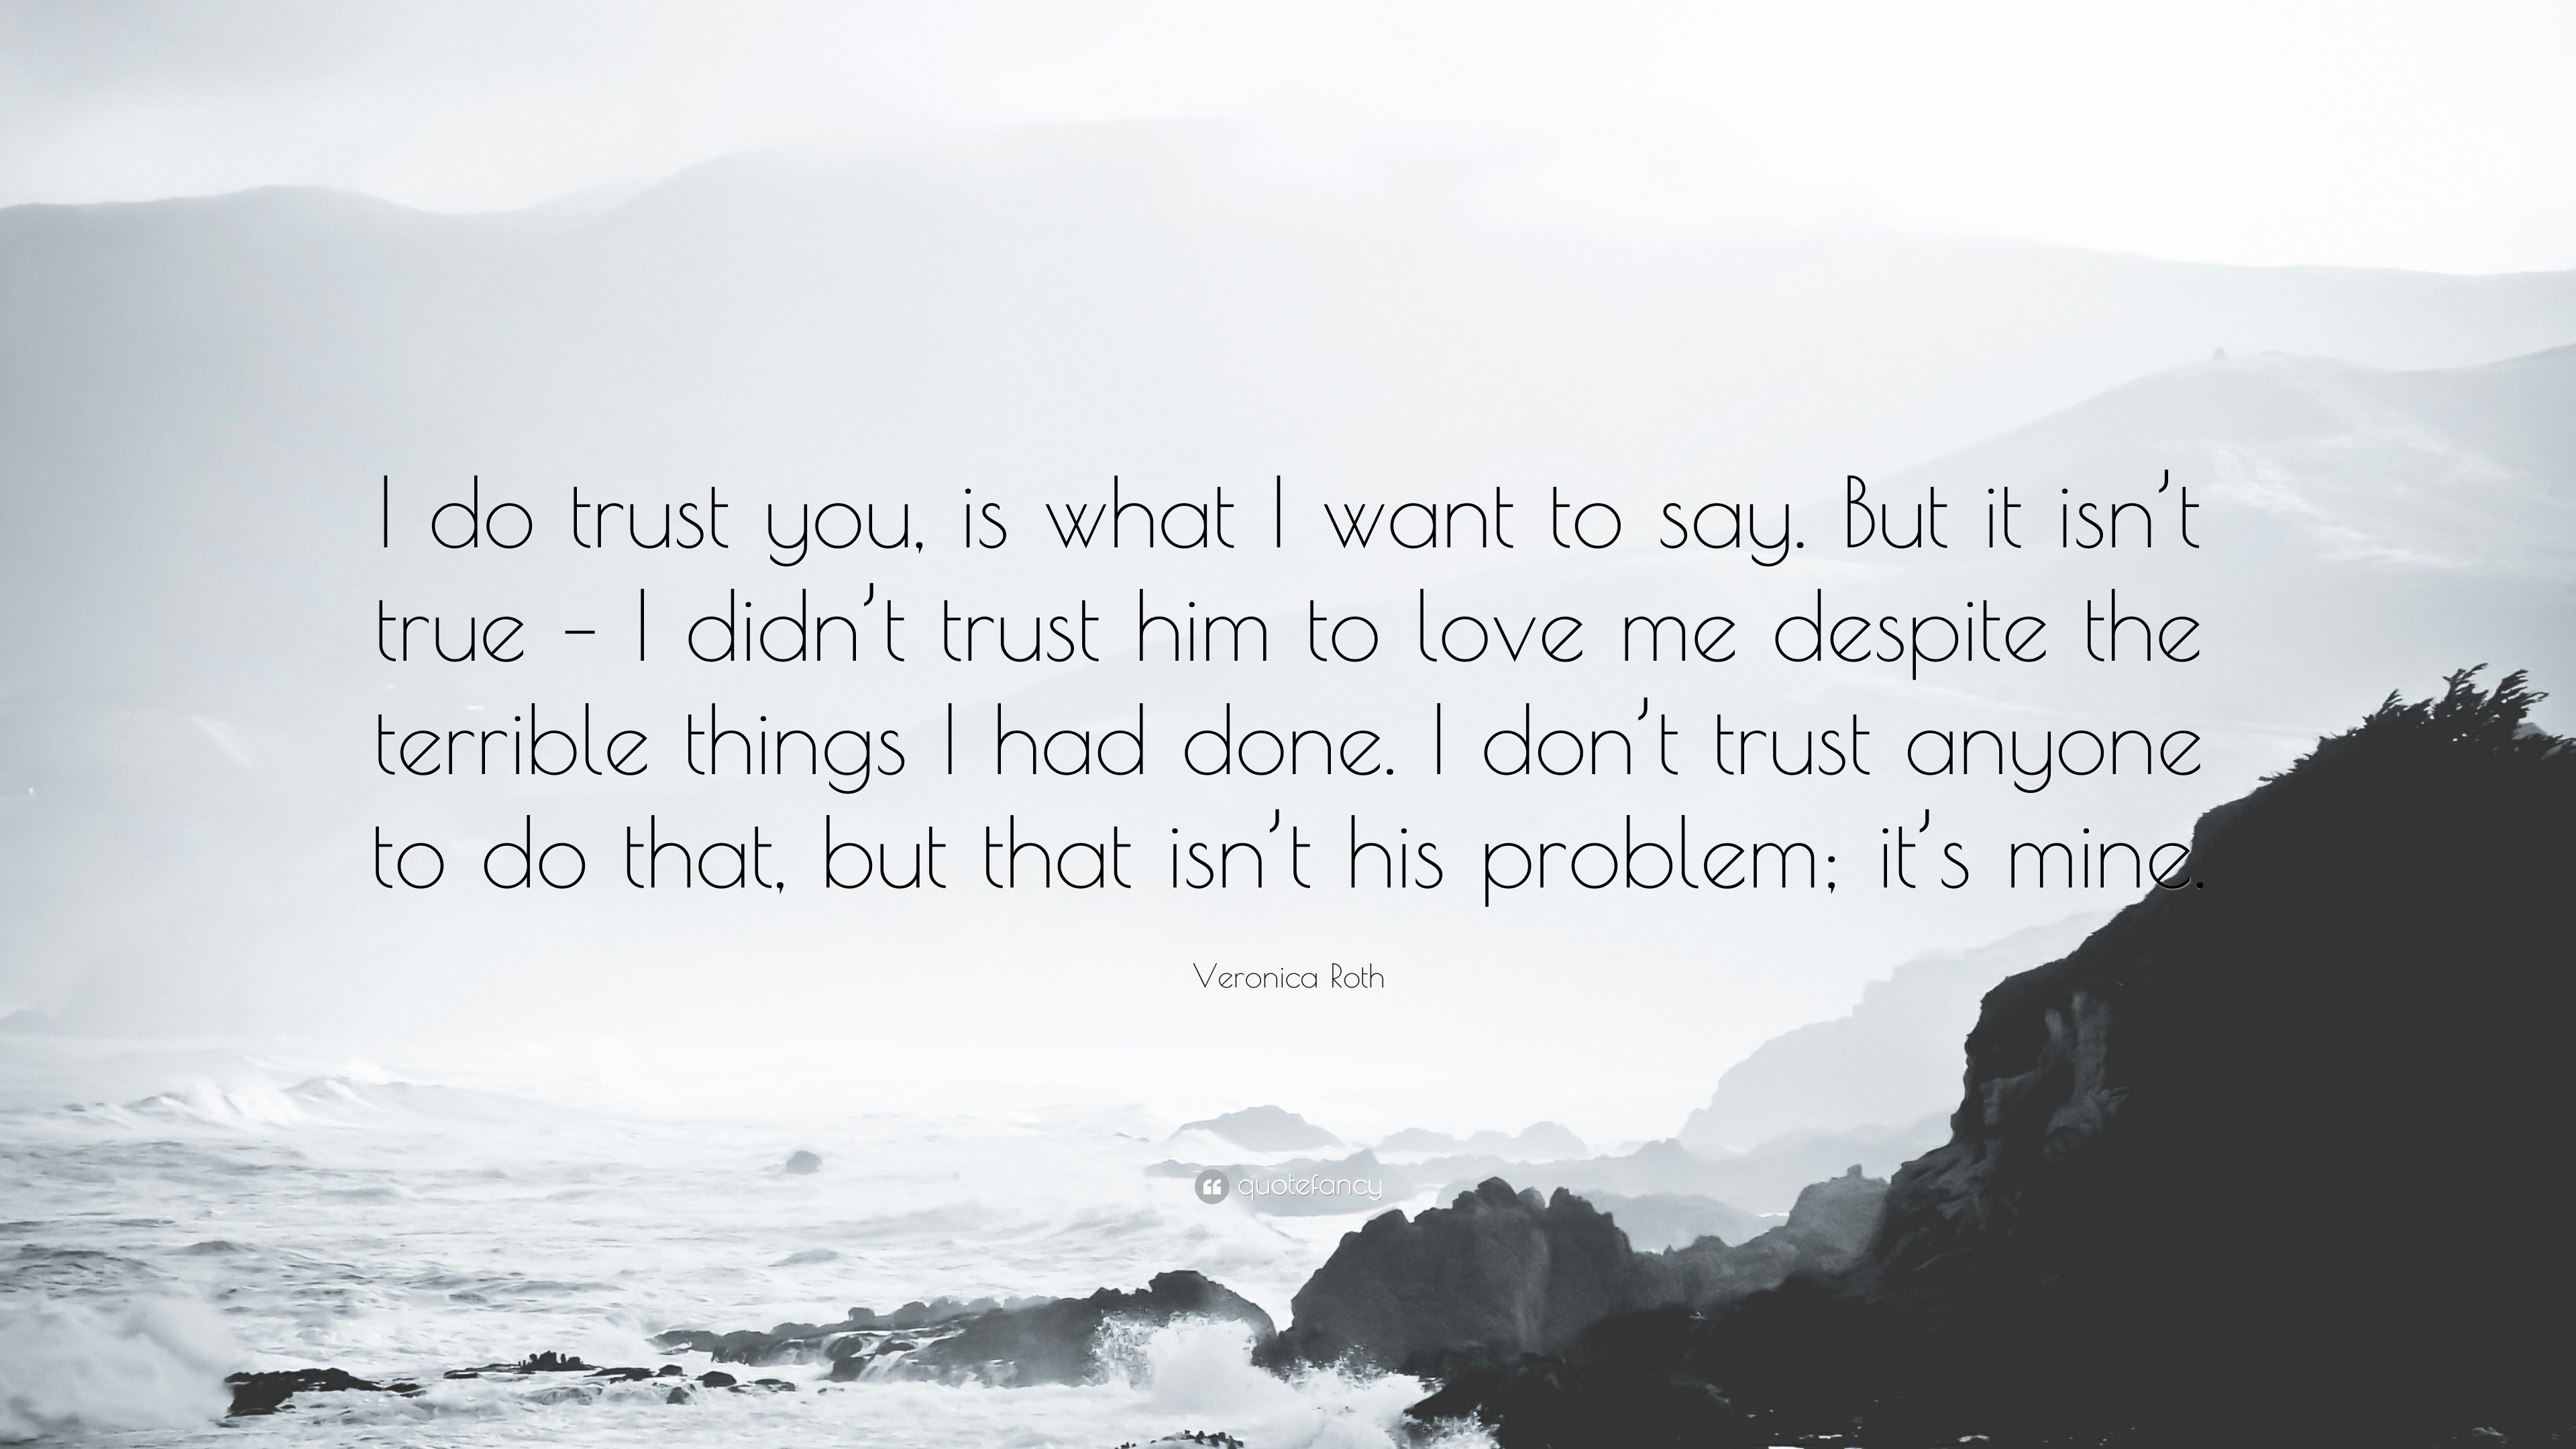 Veronica Roth Quote “I do trust you is what I want to say